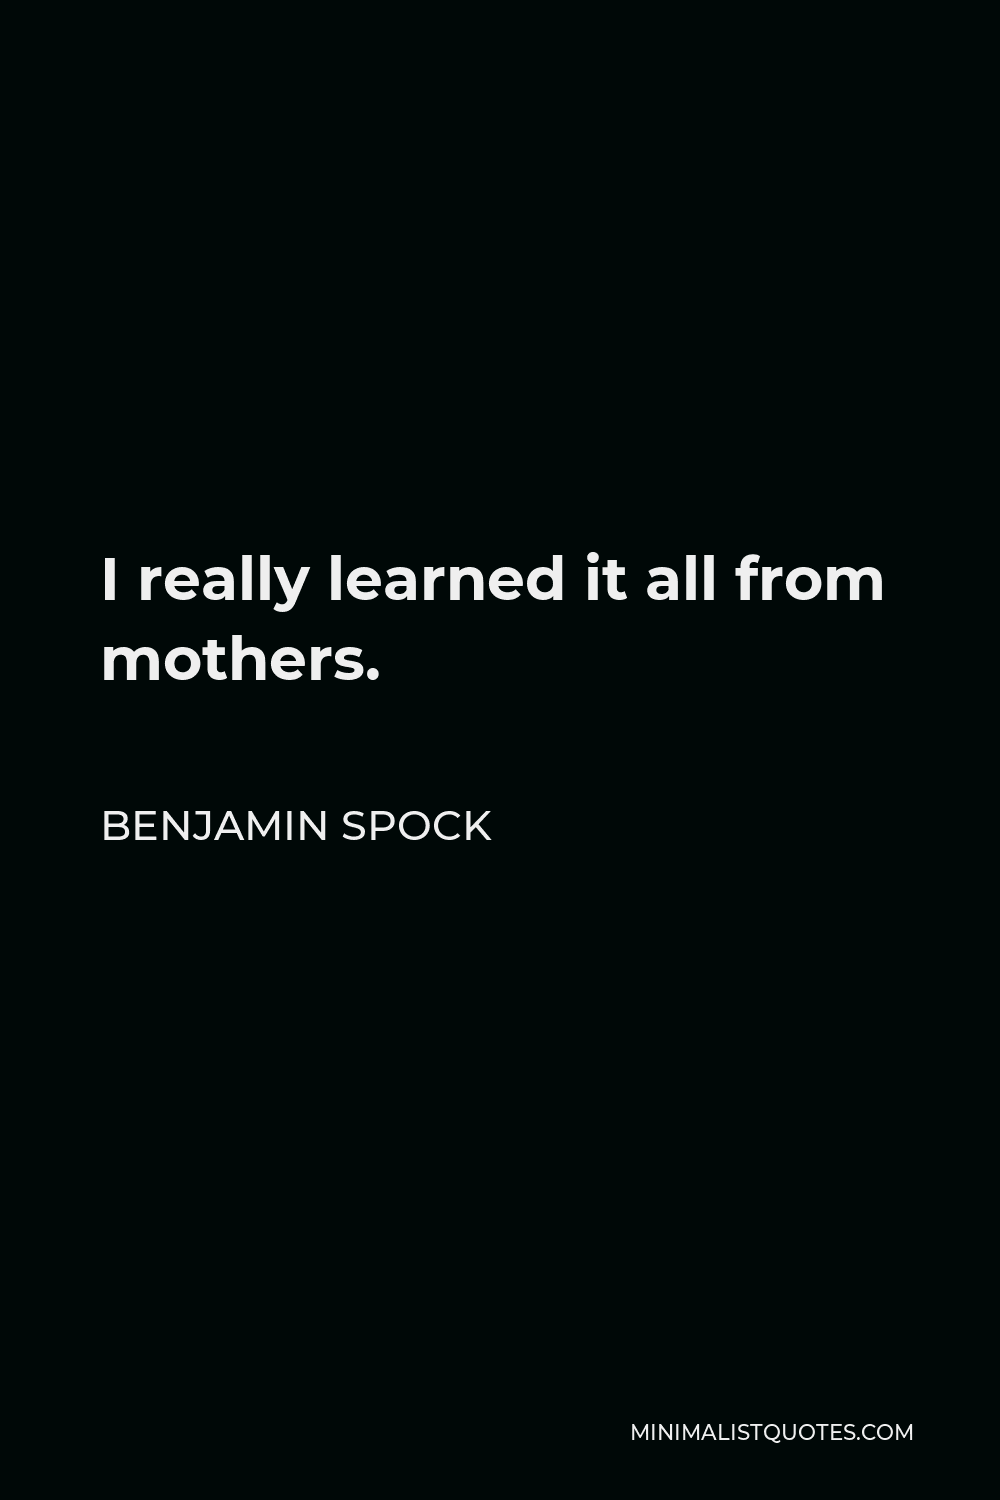 Benjamin Spock Quote - I really learned it all from mothers.